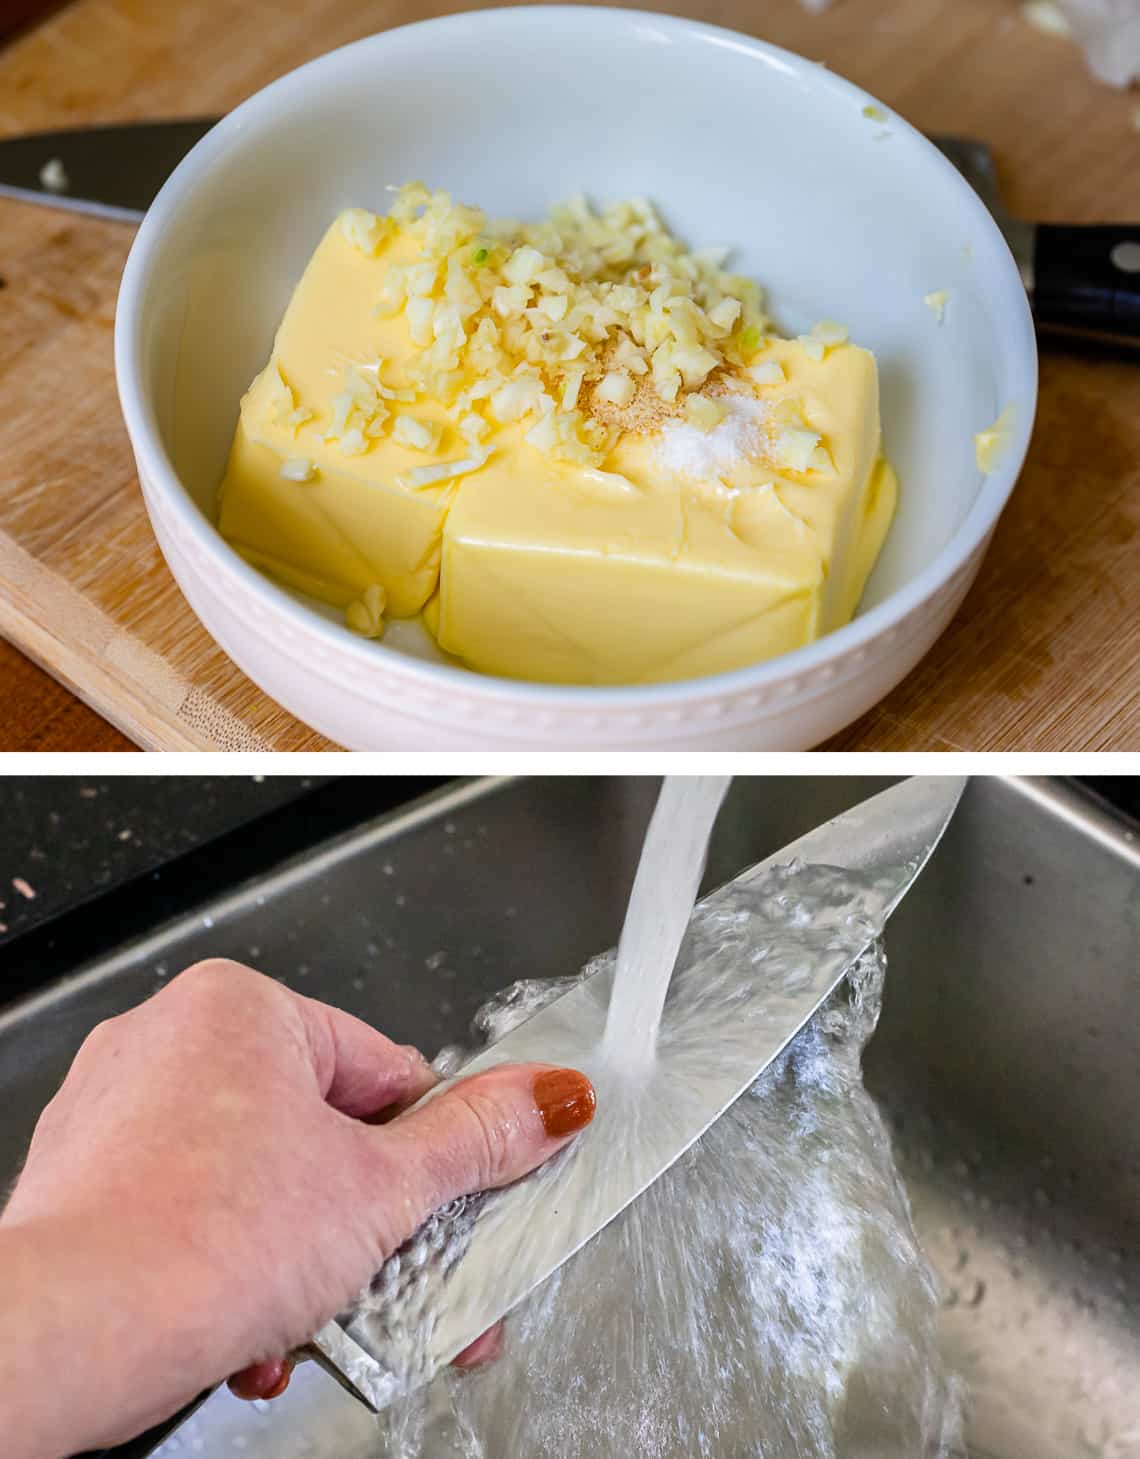 bowl with softened butter topped with garlic and seasonings, and washing the knife.